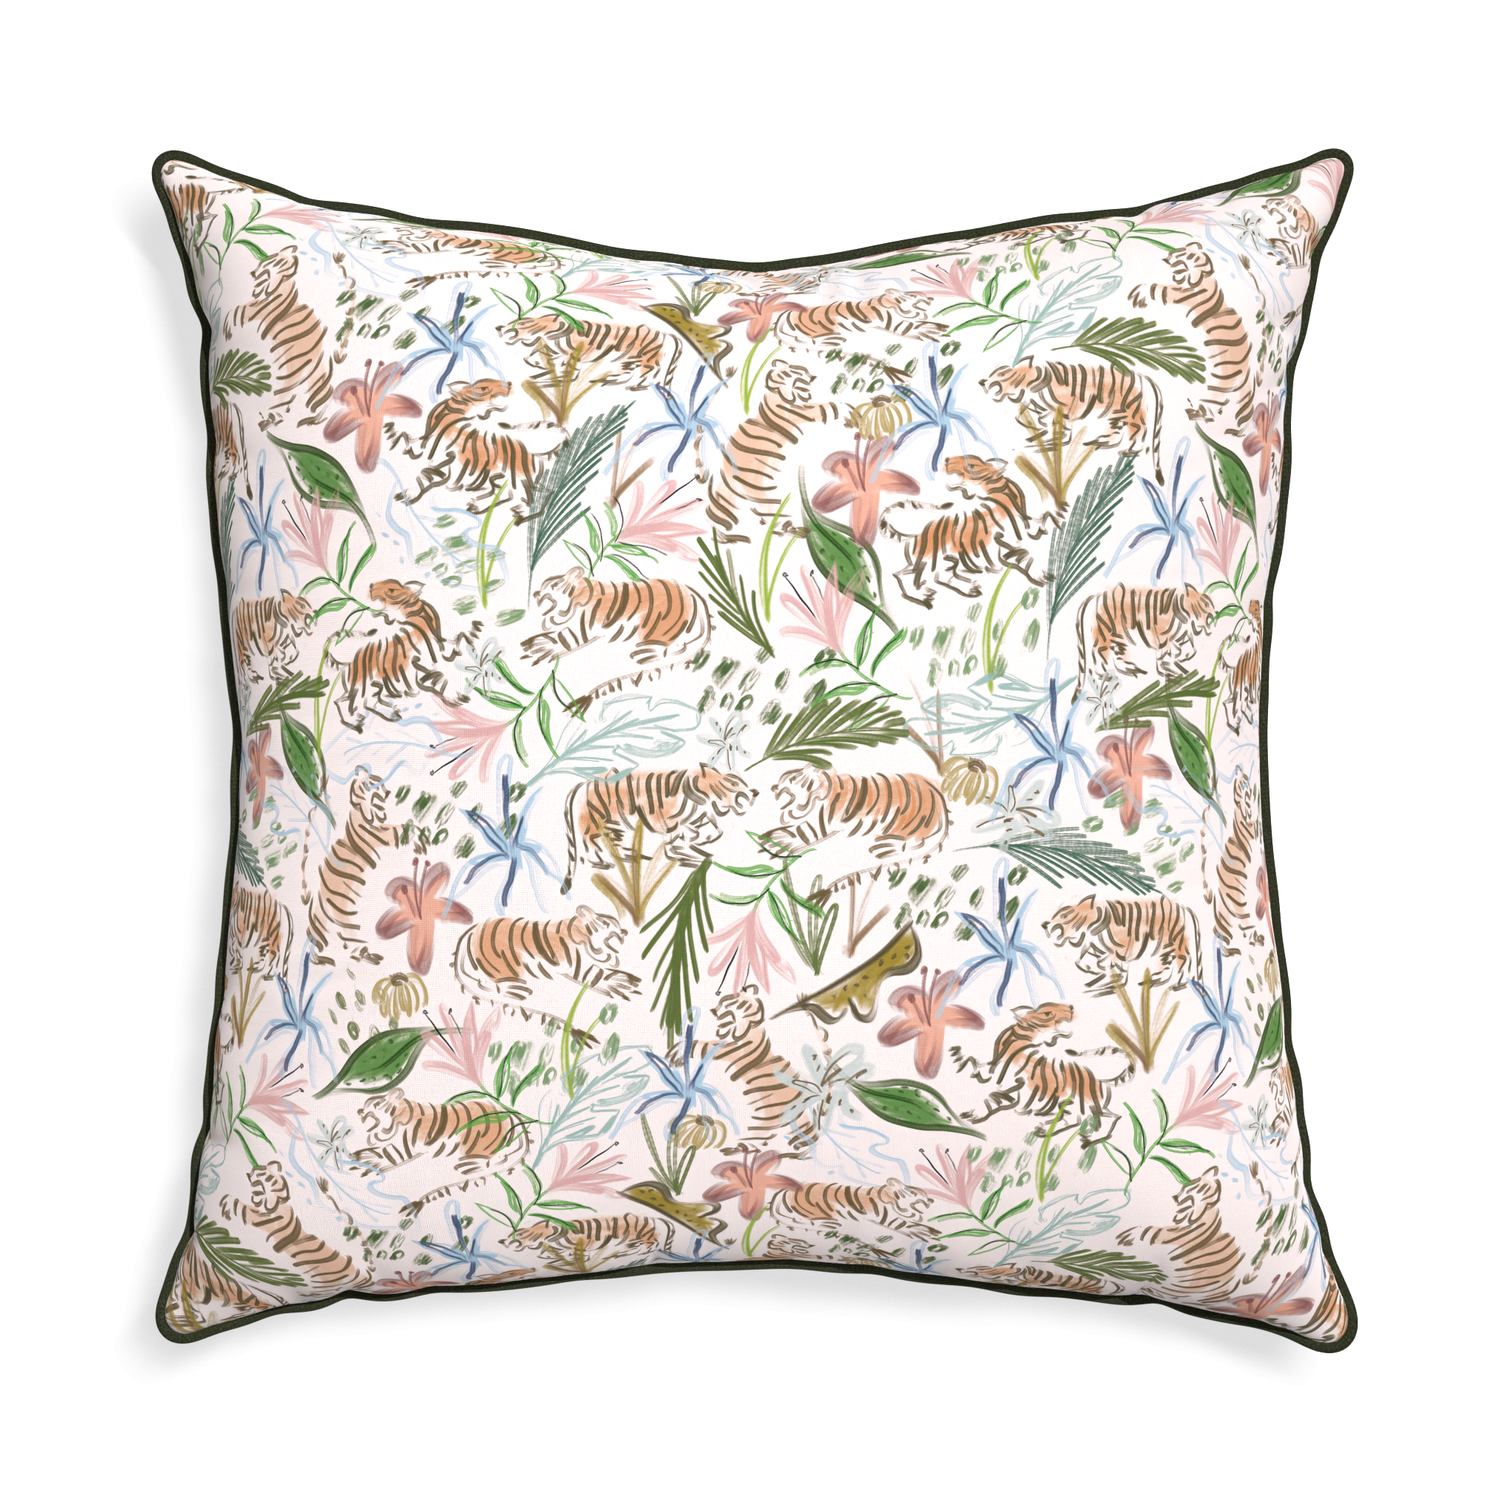 Euro-sham frida pink custom pink chinoiserie tigerpillow with f piping on white background